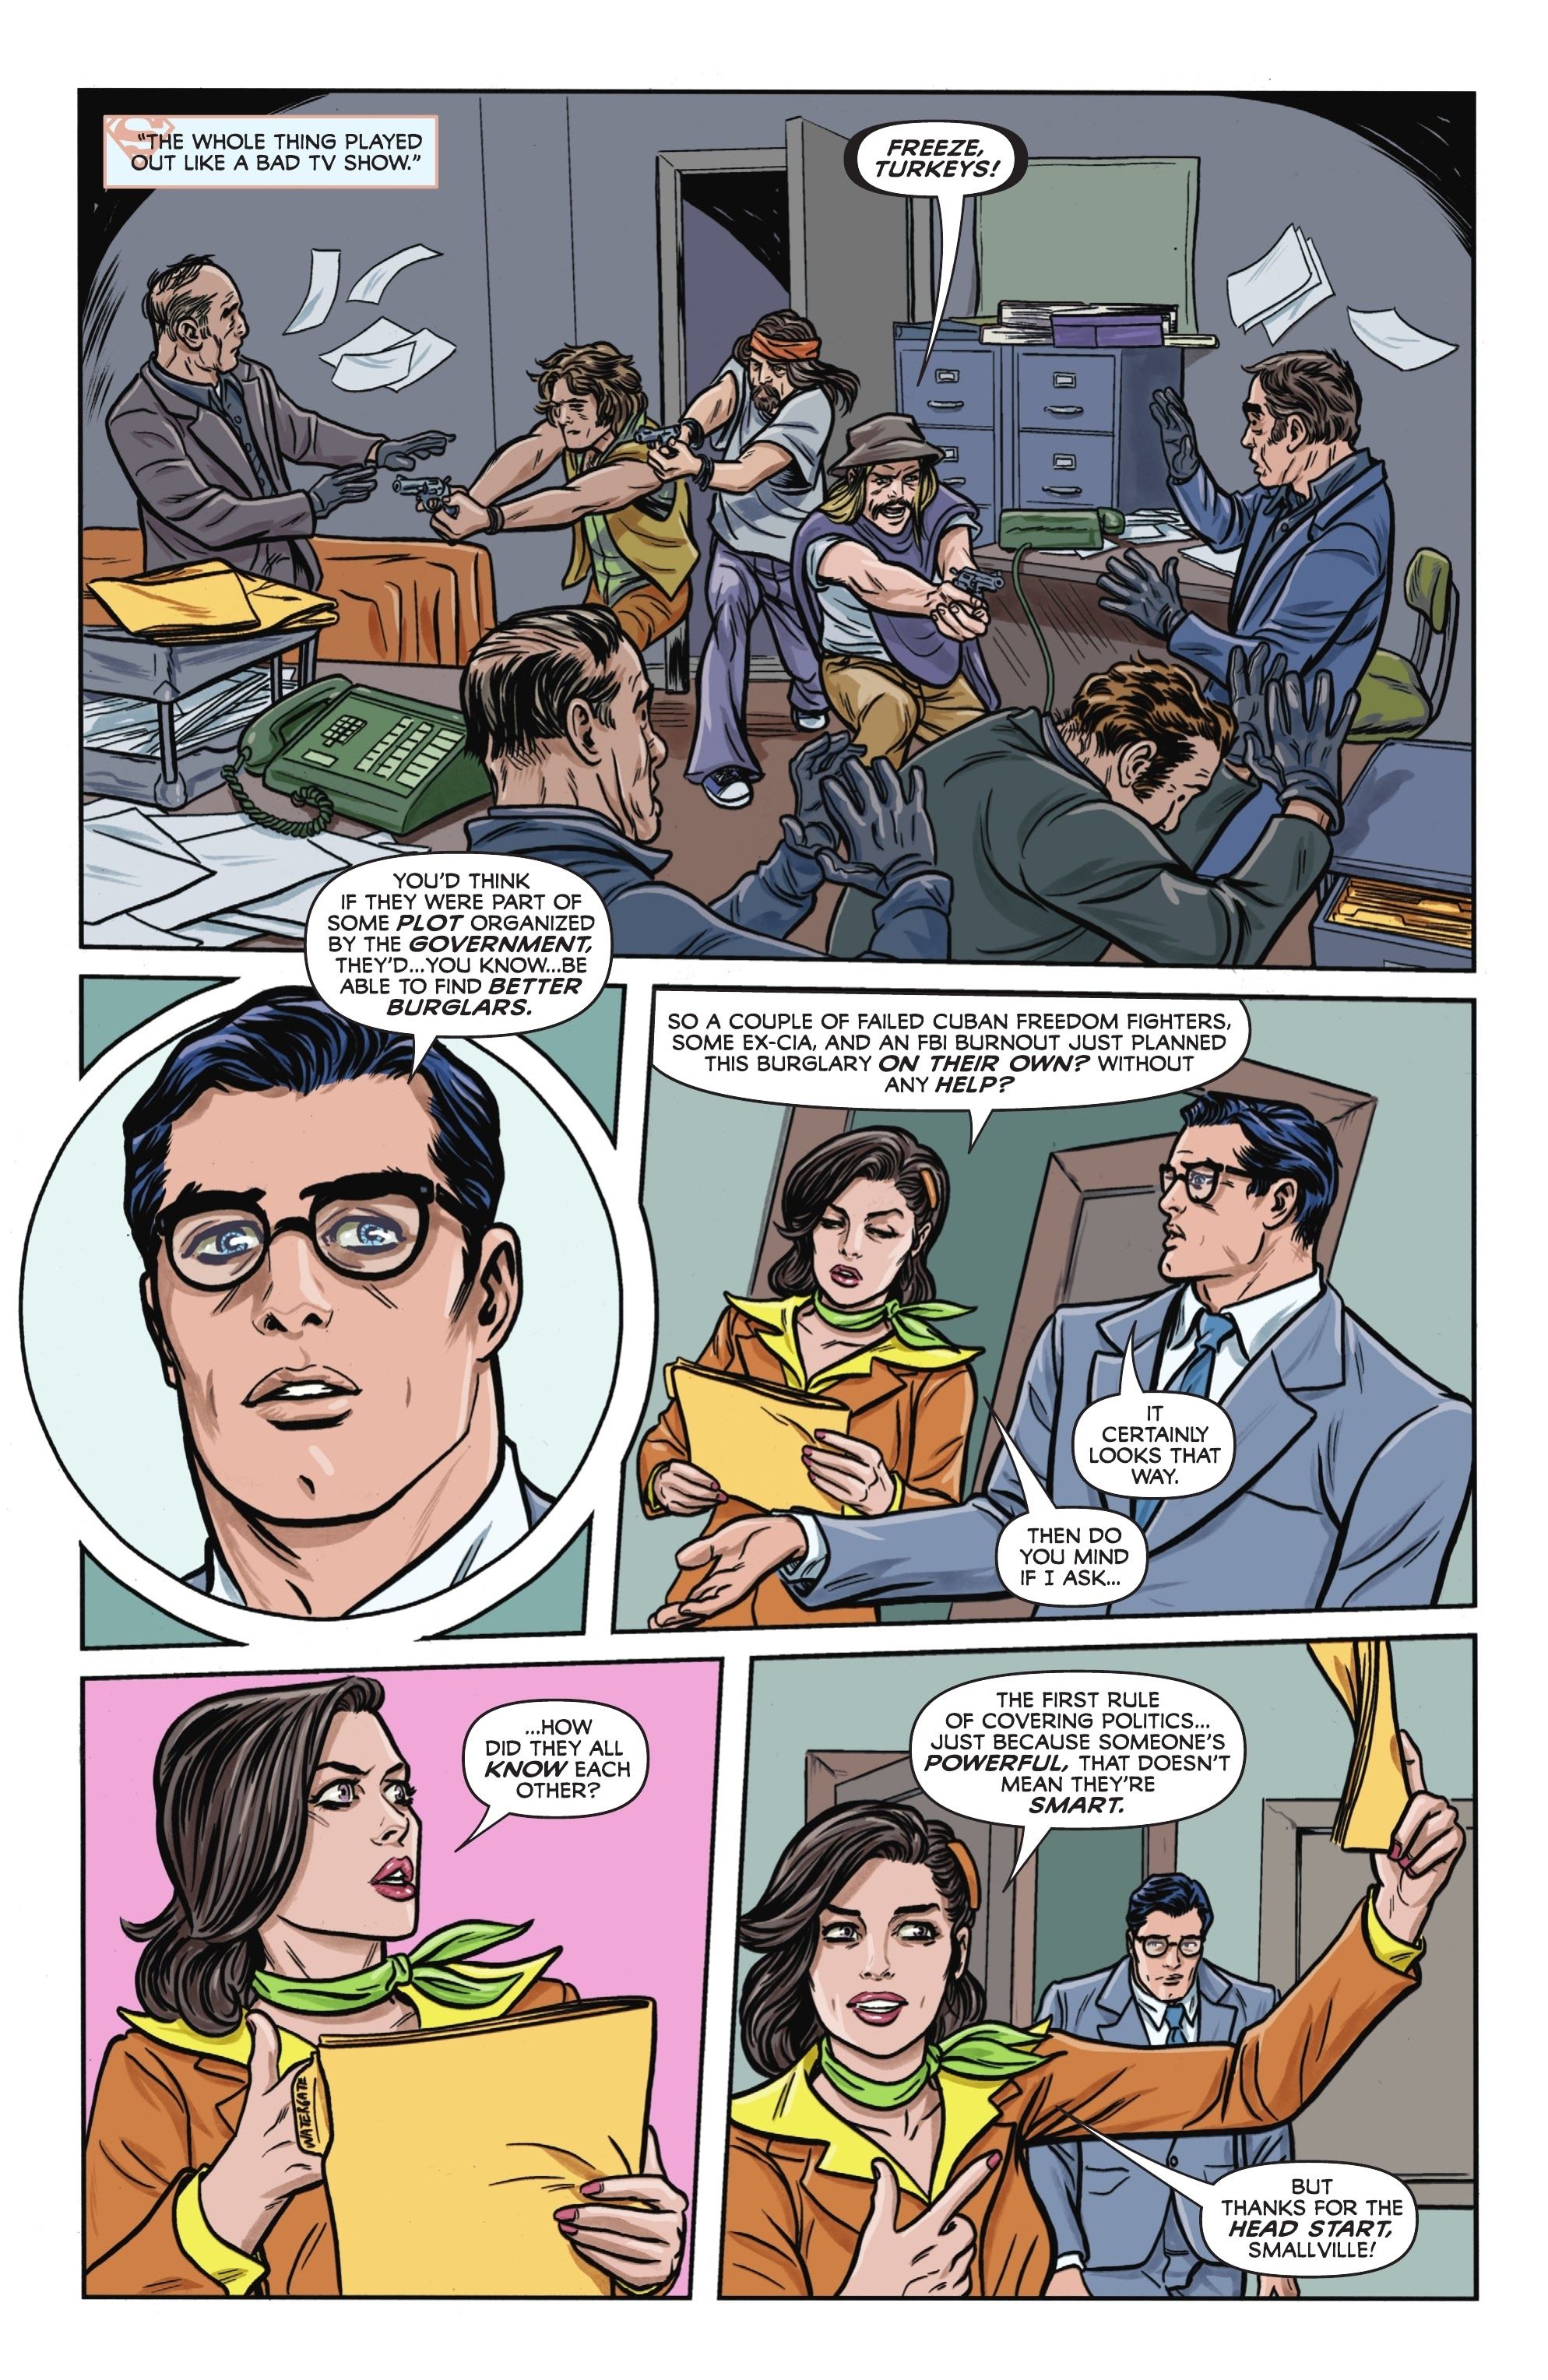 Lois Lane Breaking the Watergate Story Showed Why Superman Loves Her